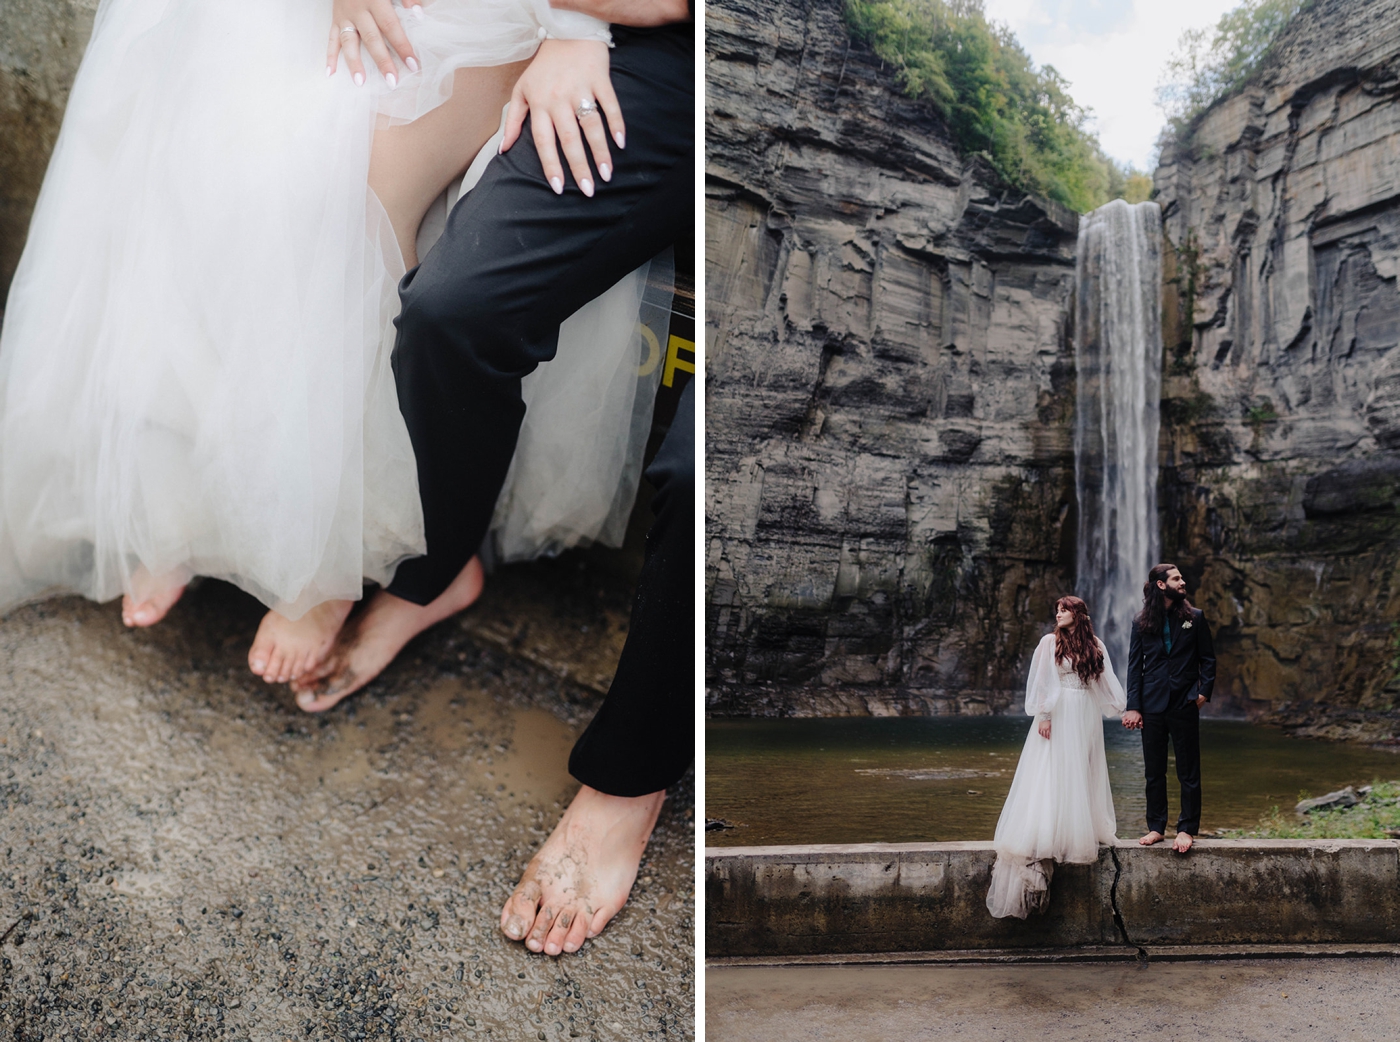 Bride and groom adventure session at a waterfall in Upstate New York